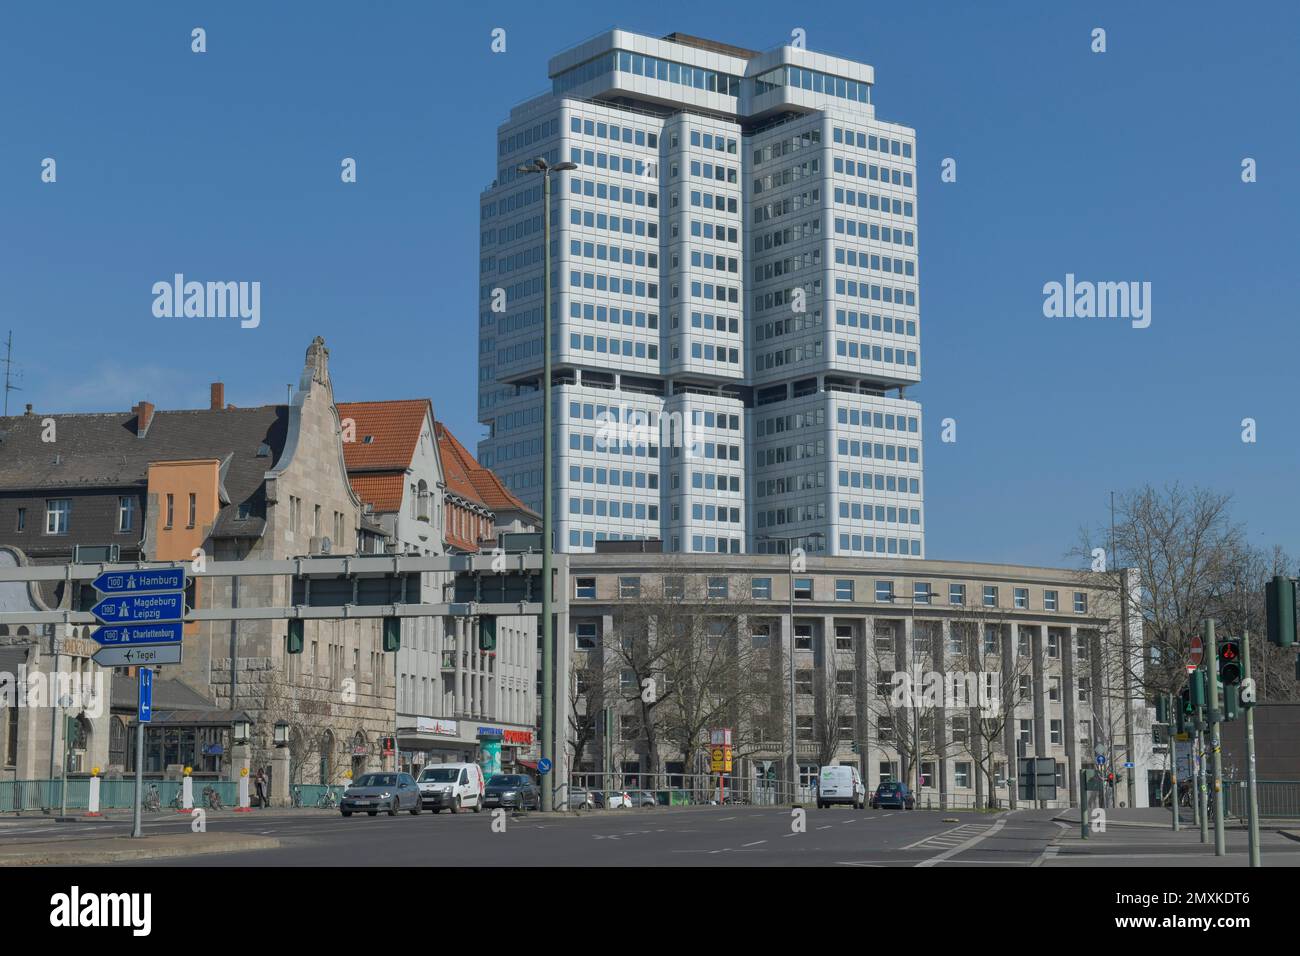 German Pension Insurance, Hohenzollerndamm, Wilmersdorf, Berlin, Allemagne, Europe Banque D'Images